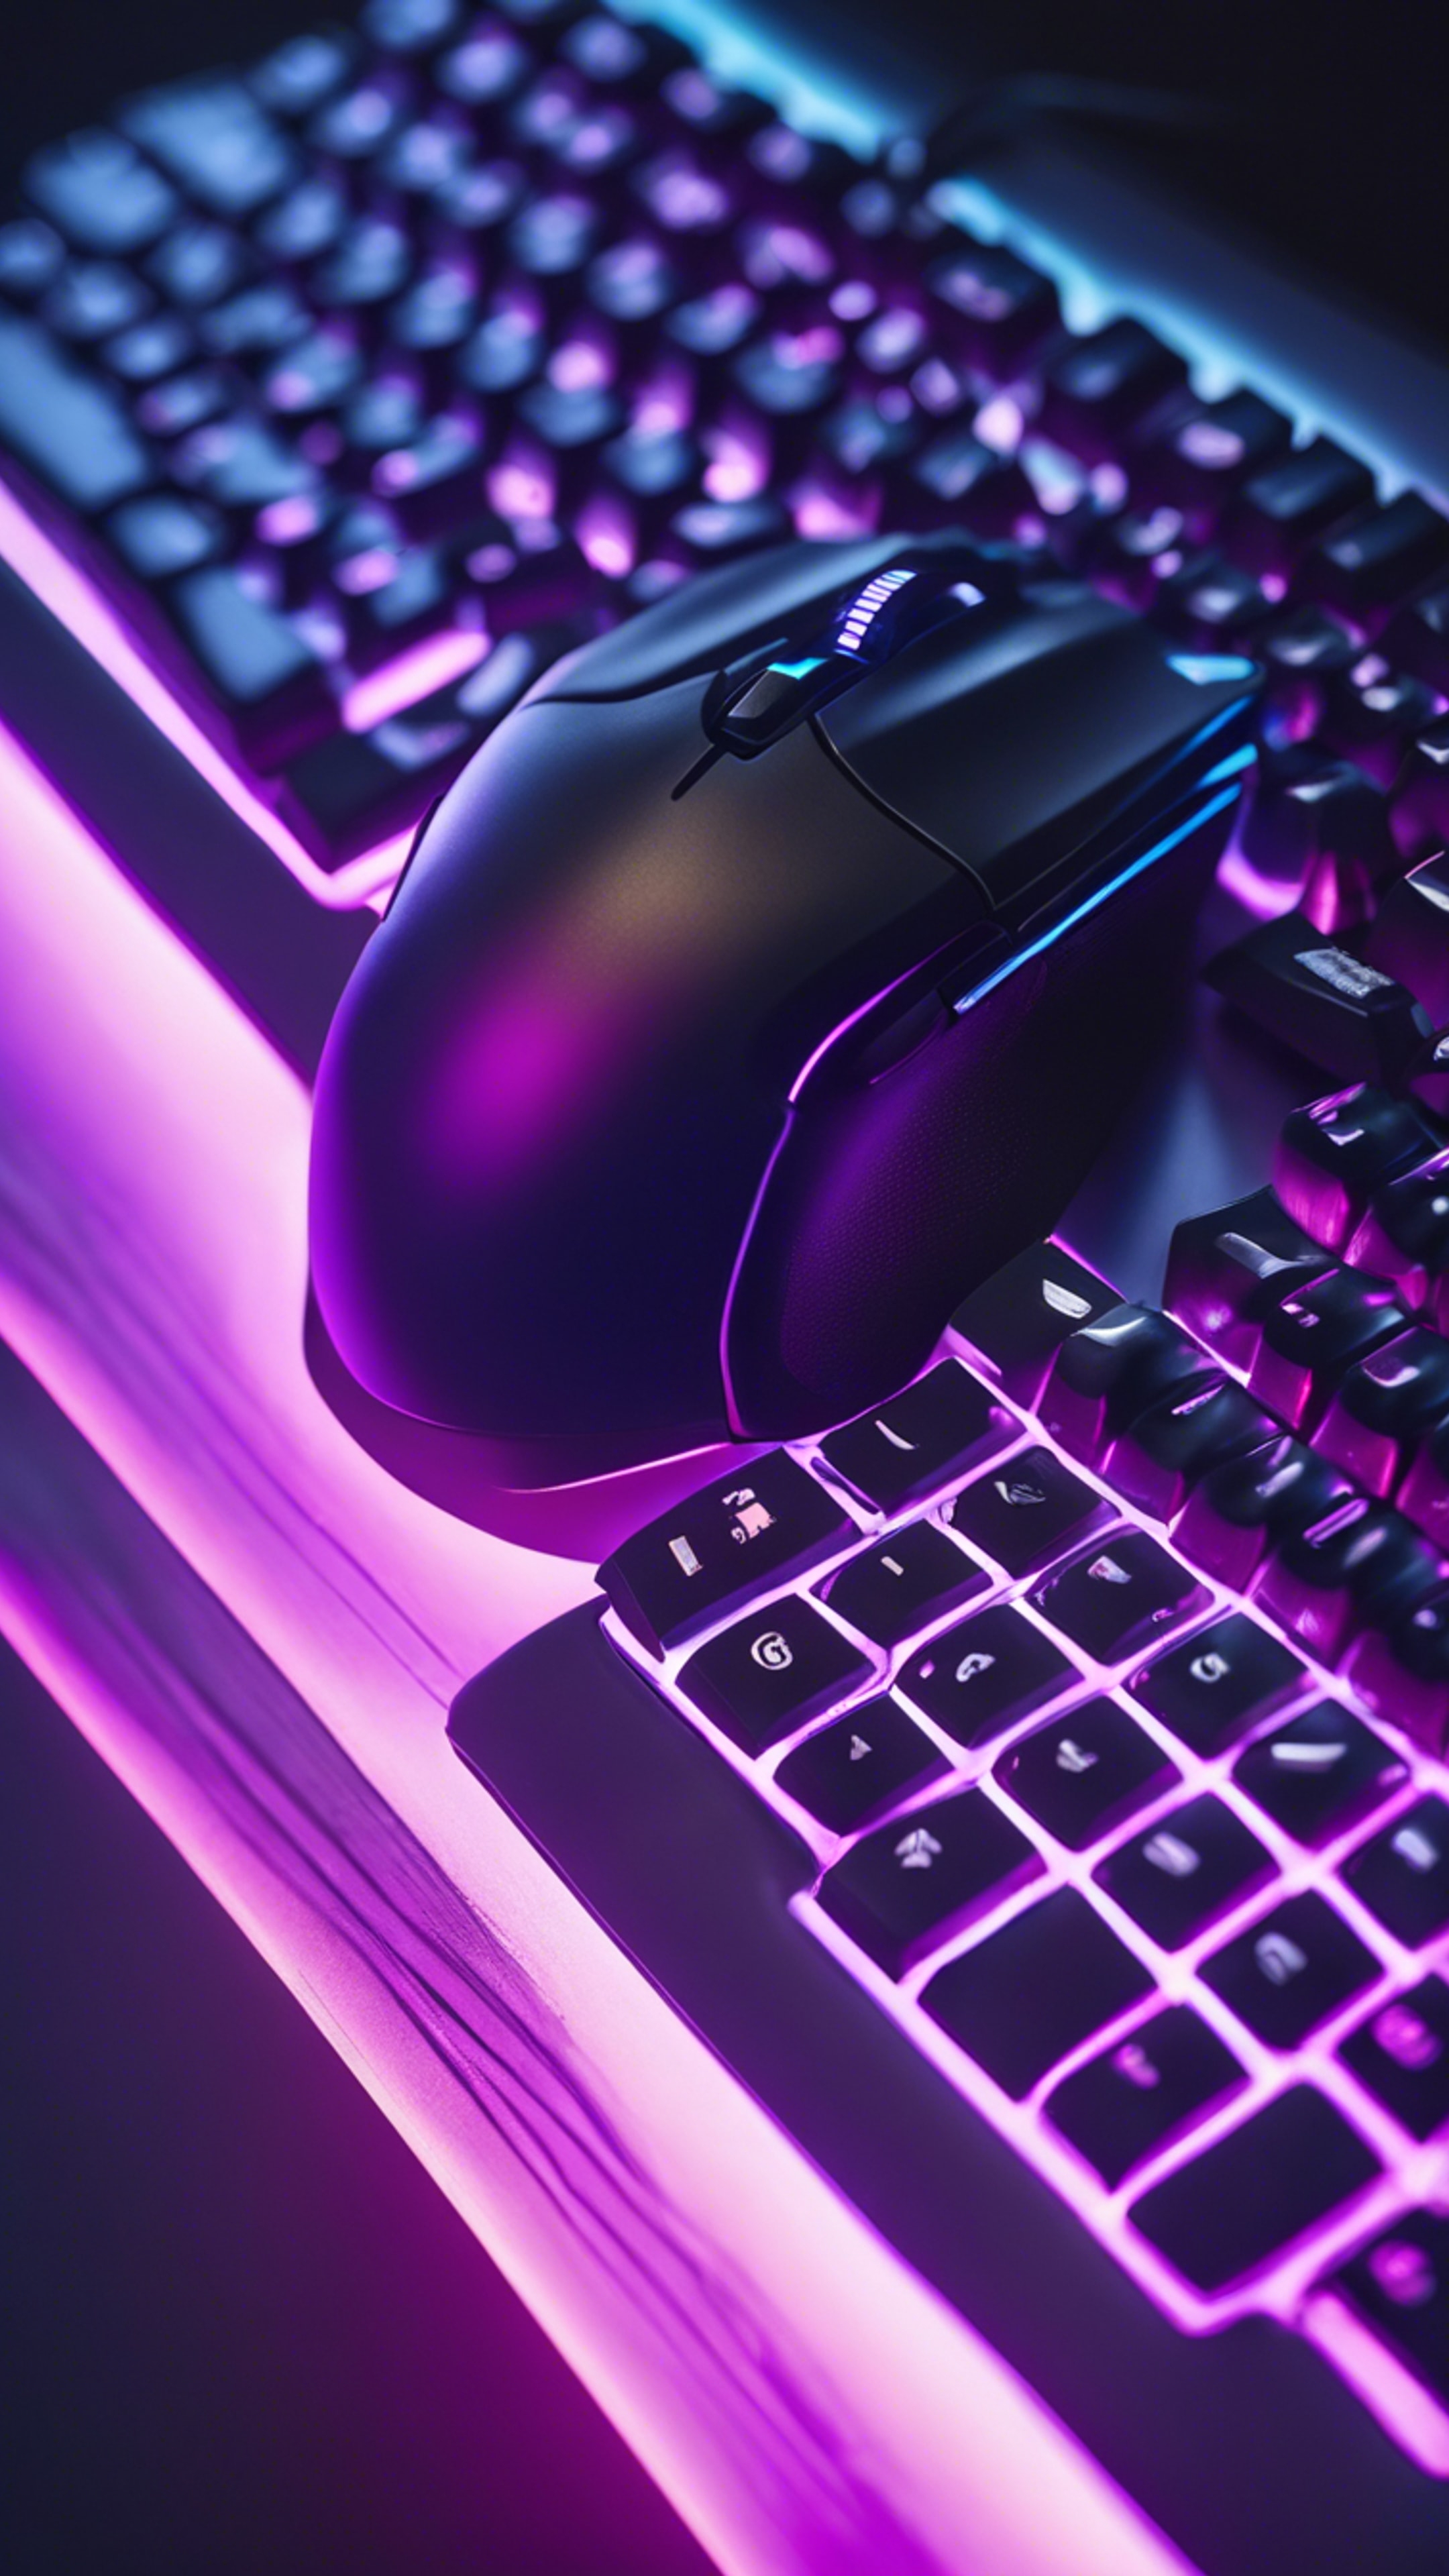 A top down view of a gaming keyboard and mouse bathed in a soothing gradient of blue to purple backlighting. Kertas dinding[d1c9d3144afe4da3b536]